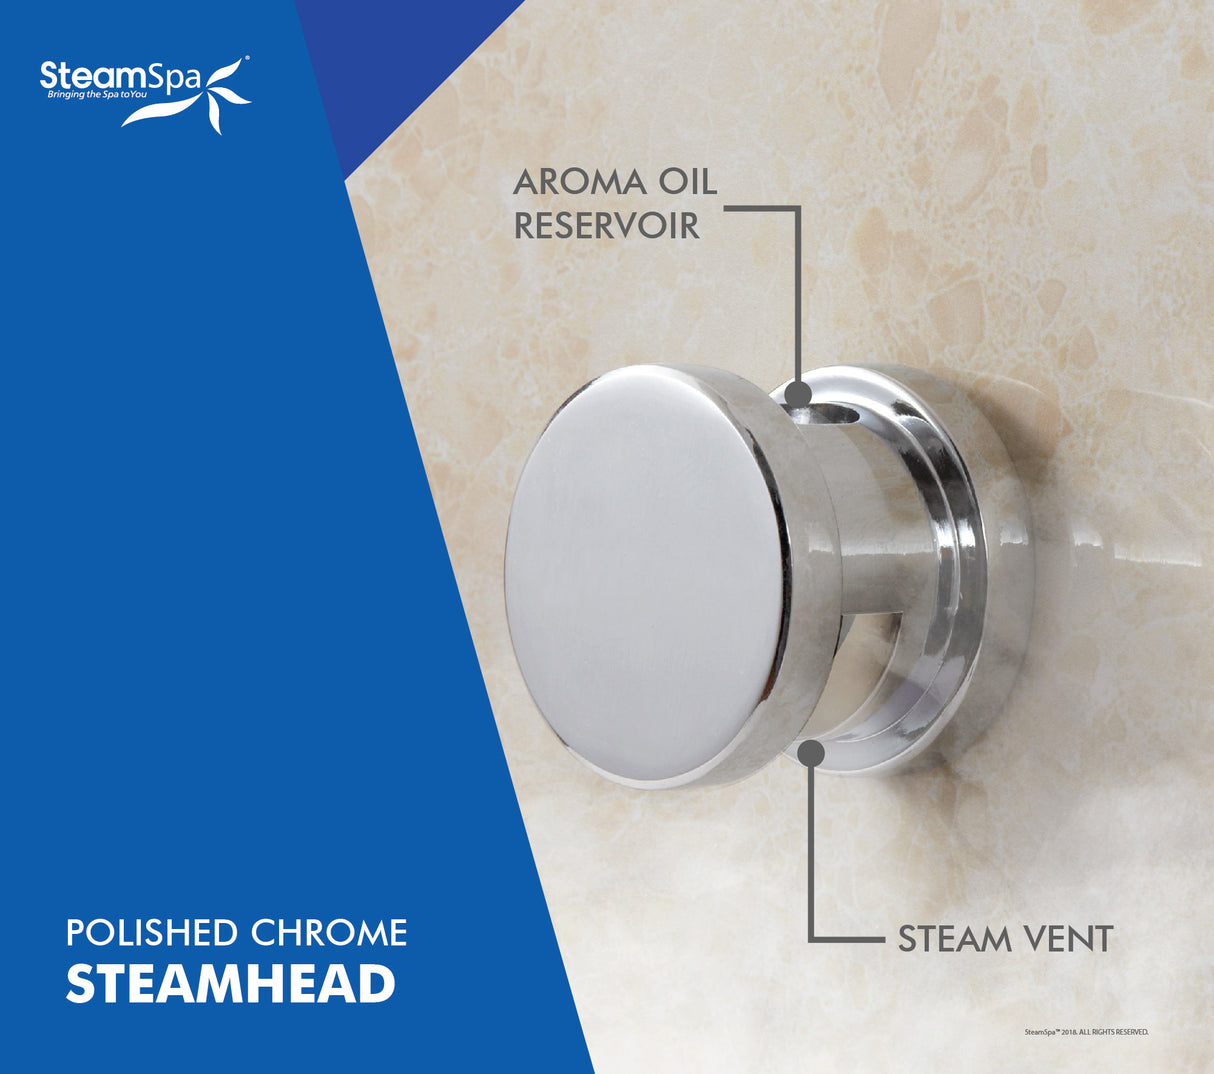 Raven Series 6kW QuickStart Steam Bath Generator Package in Polished Chrome RVT600CH-A